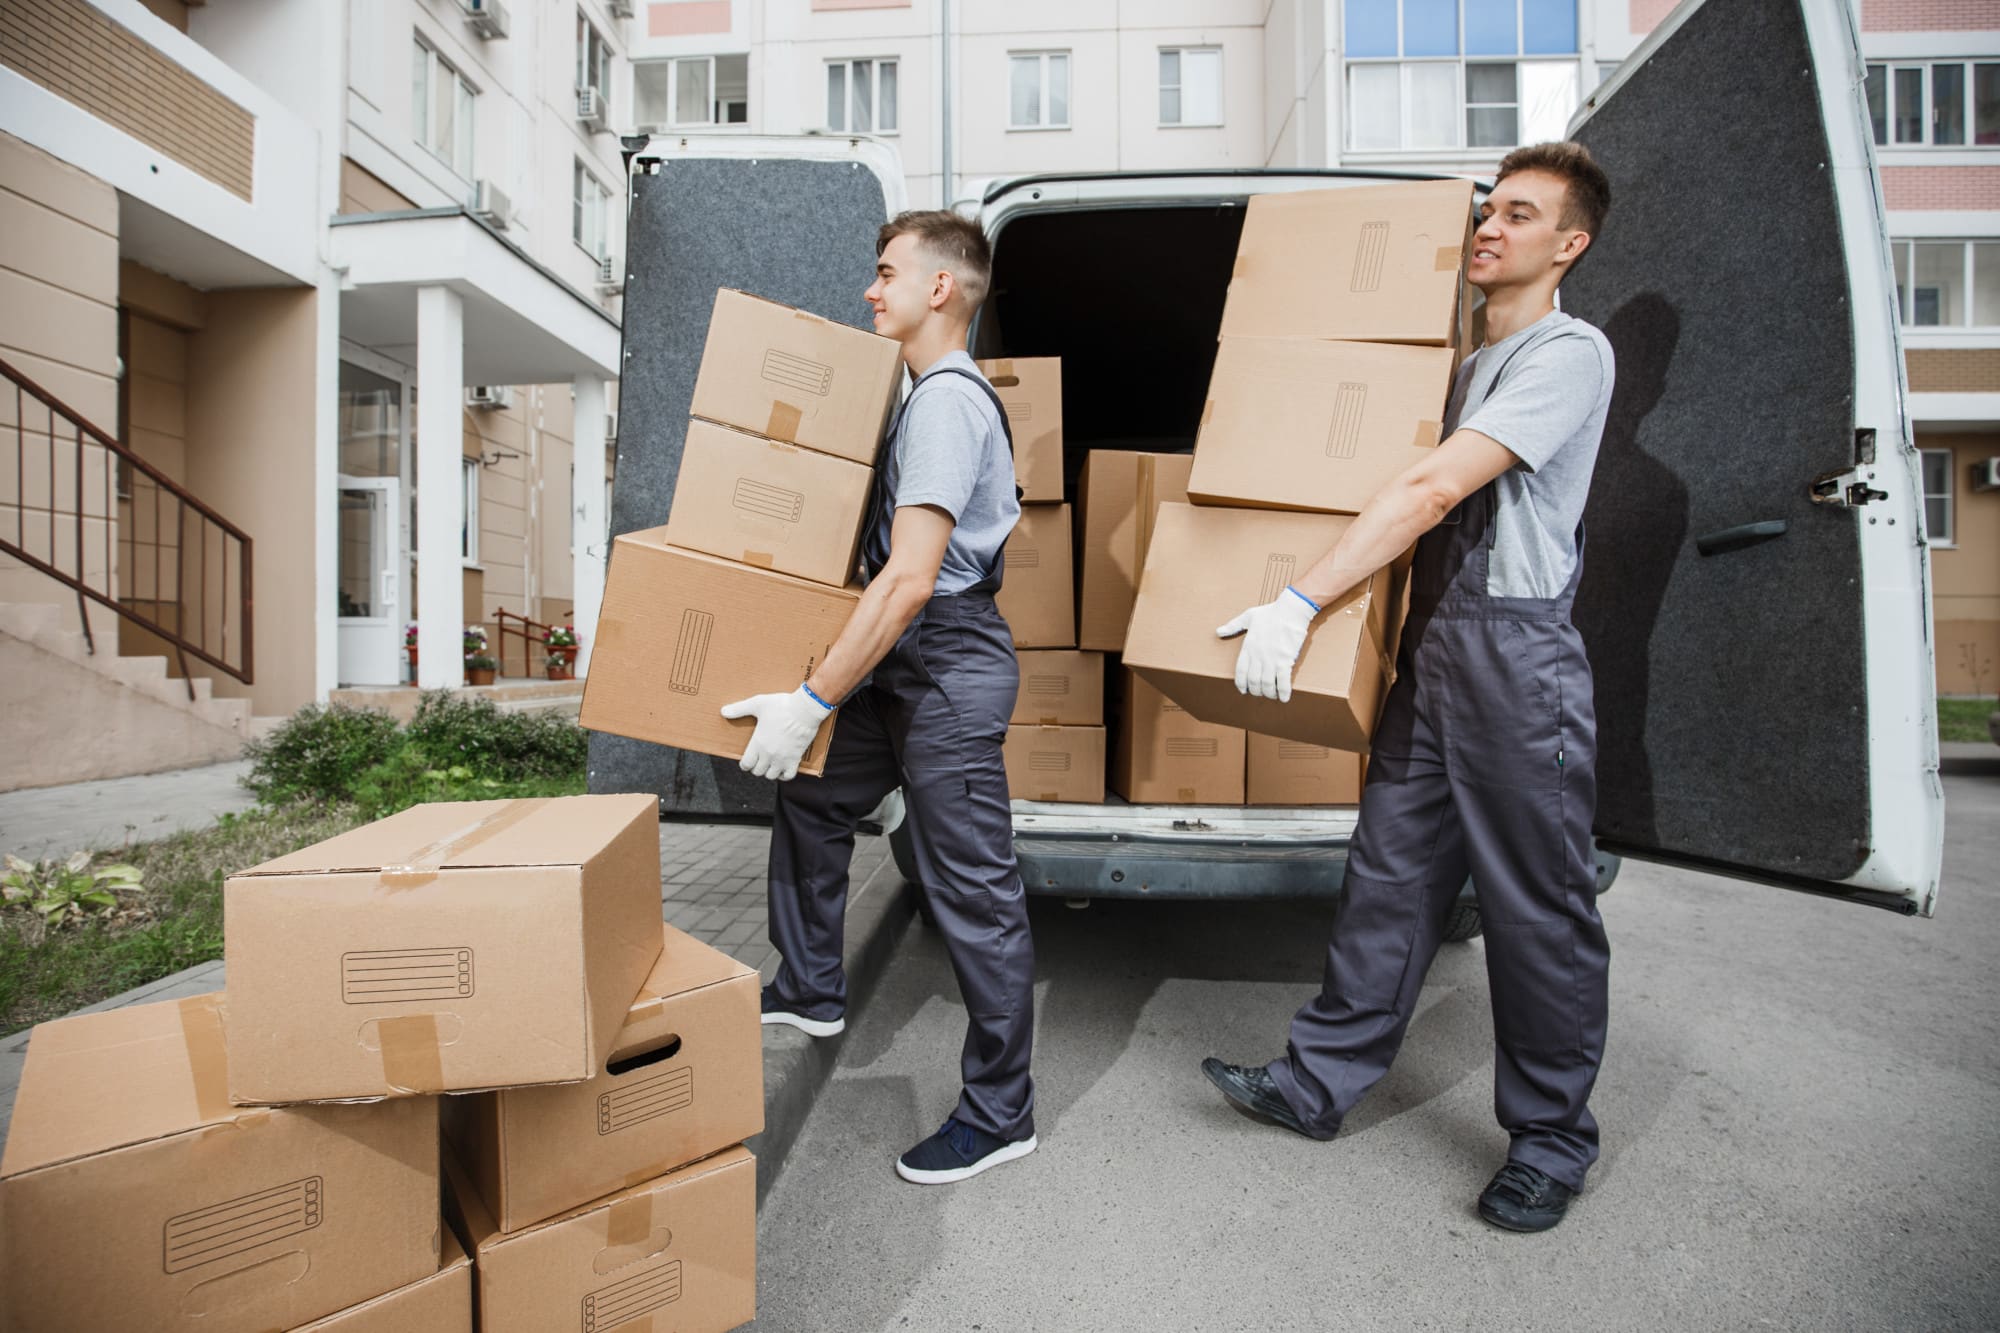 Professional movers unloading truck